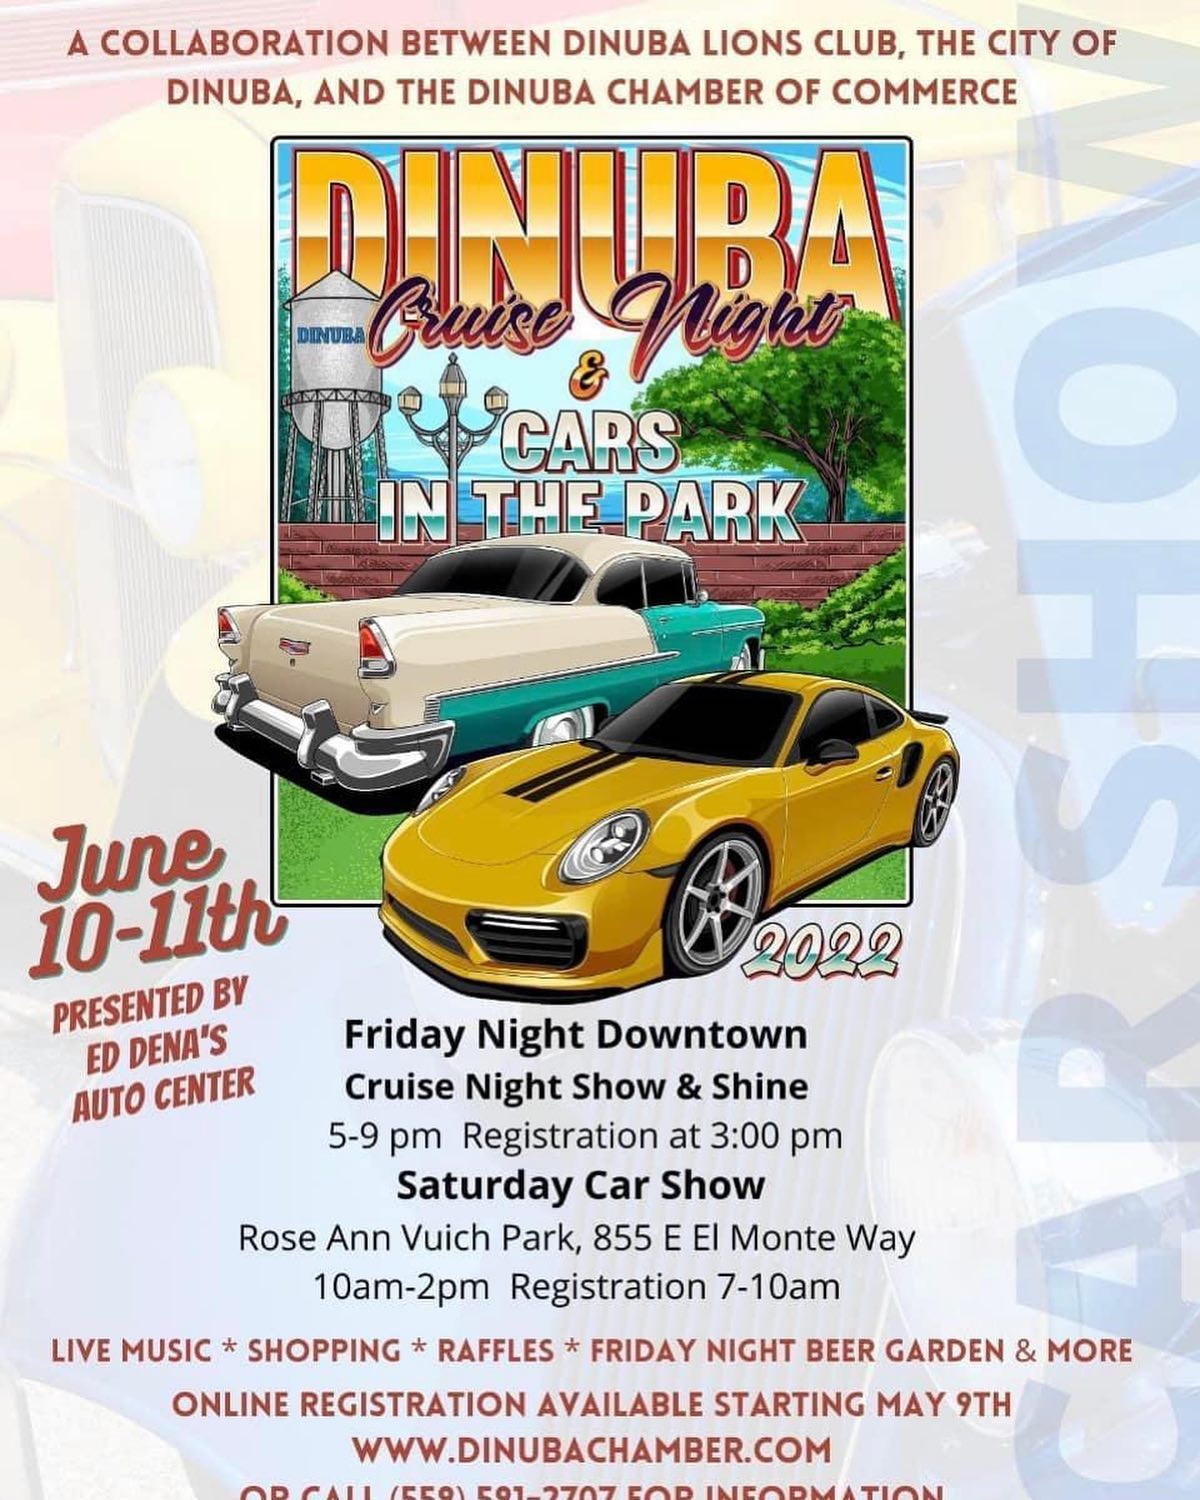 Dinuba Cruise Night and Cars in the Park